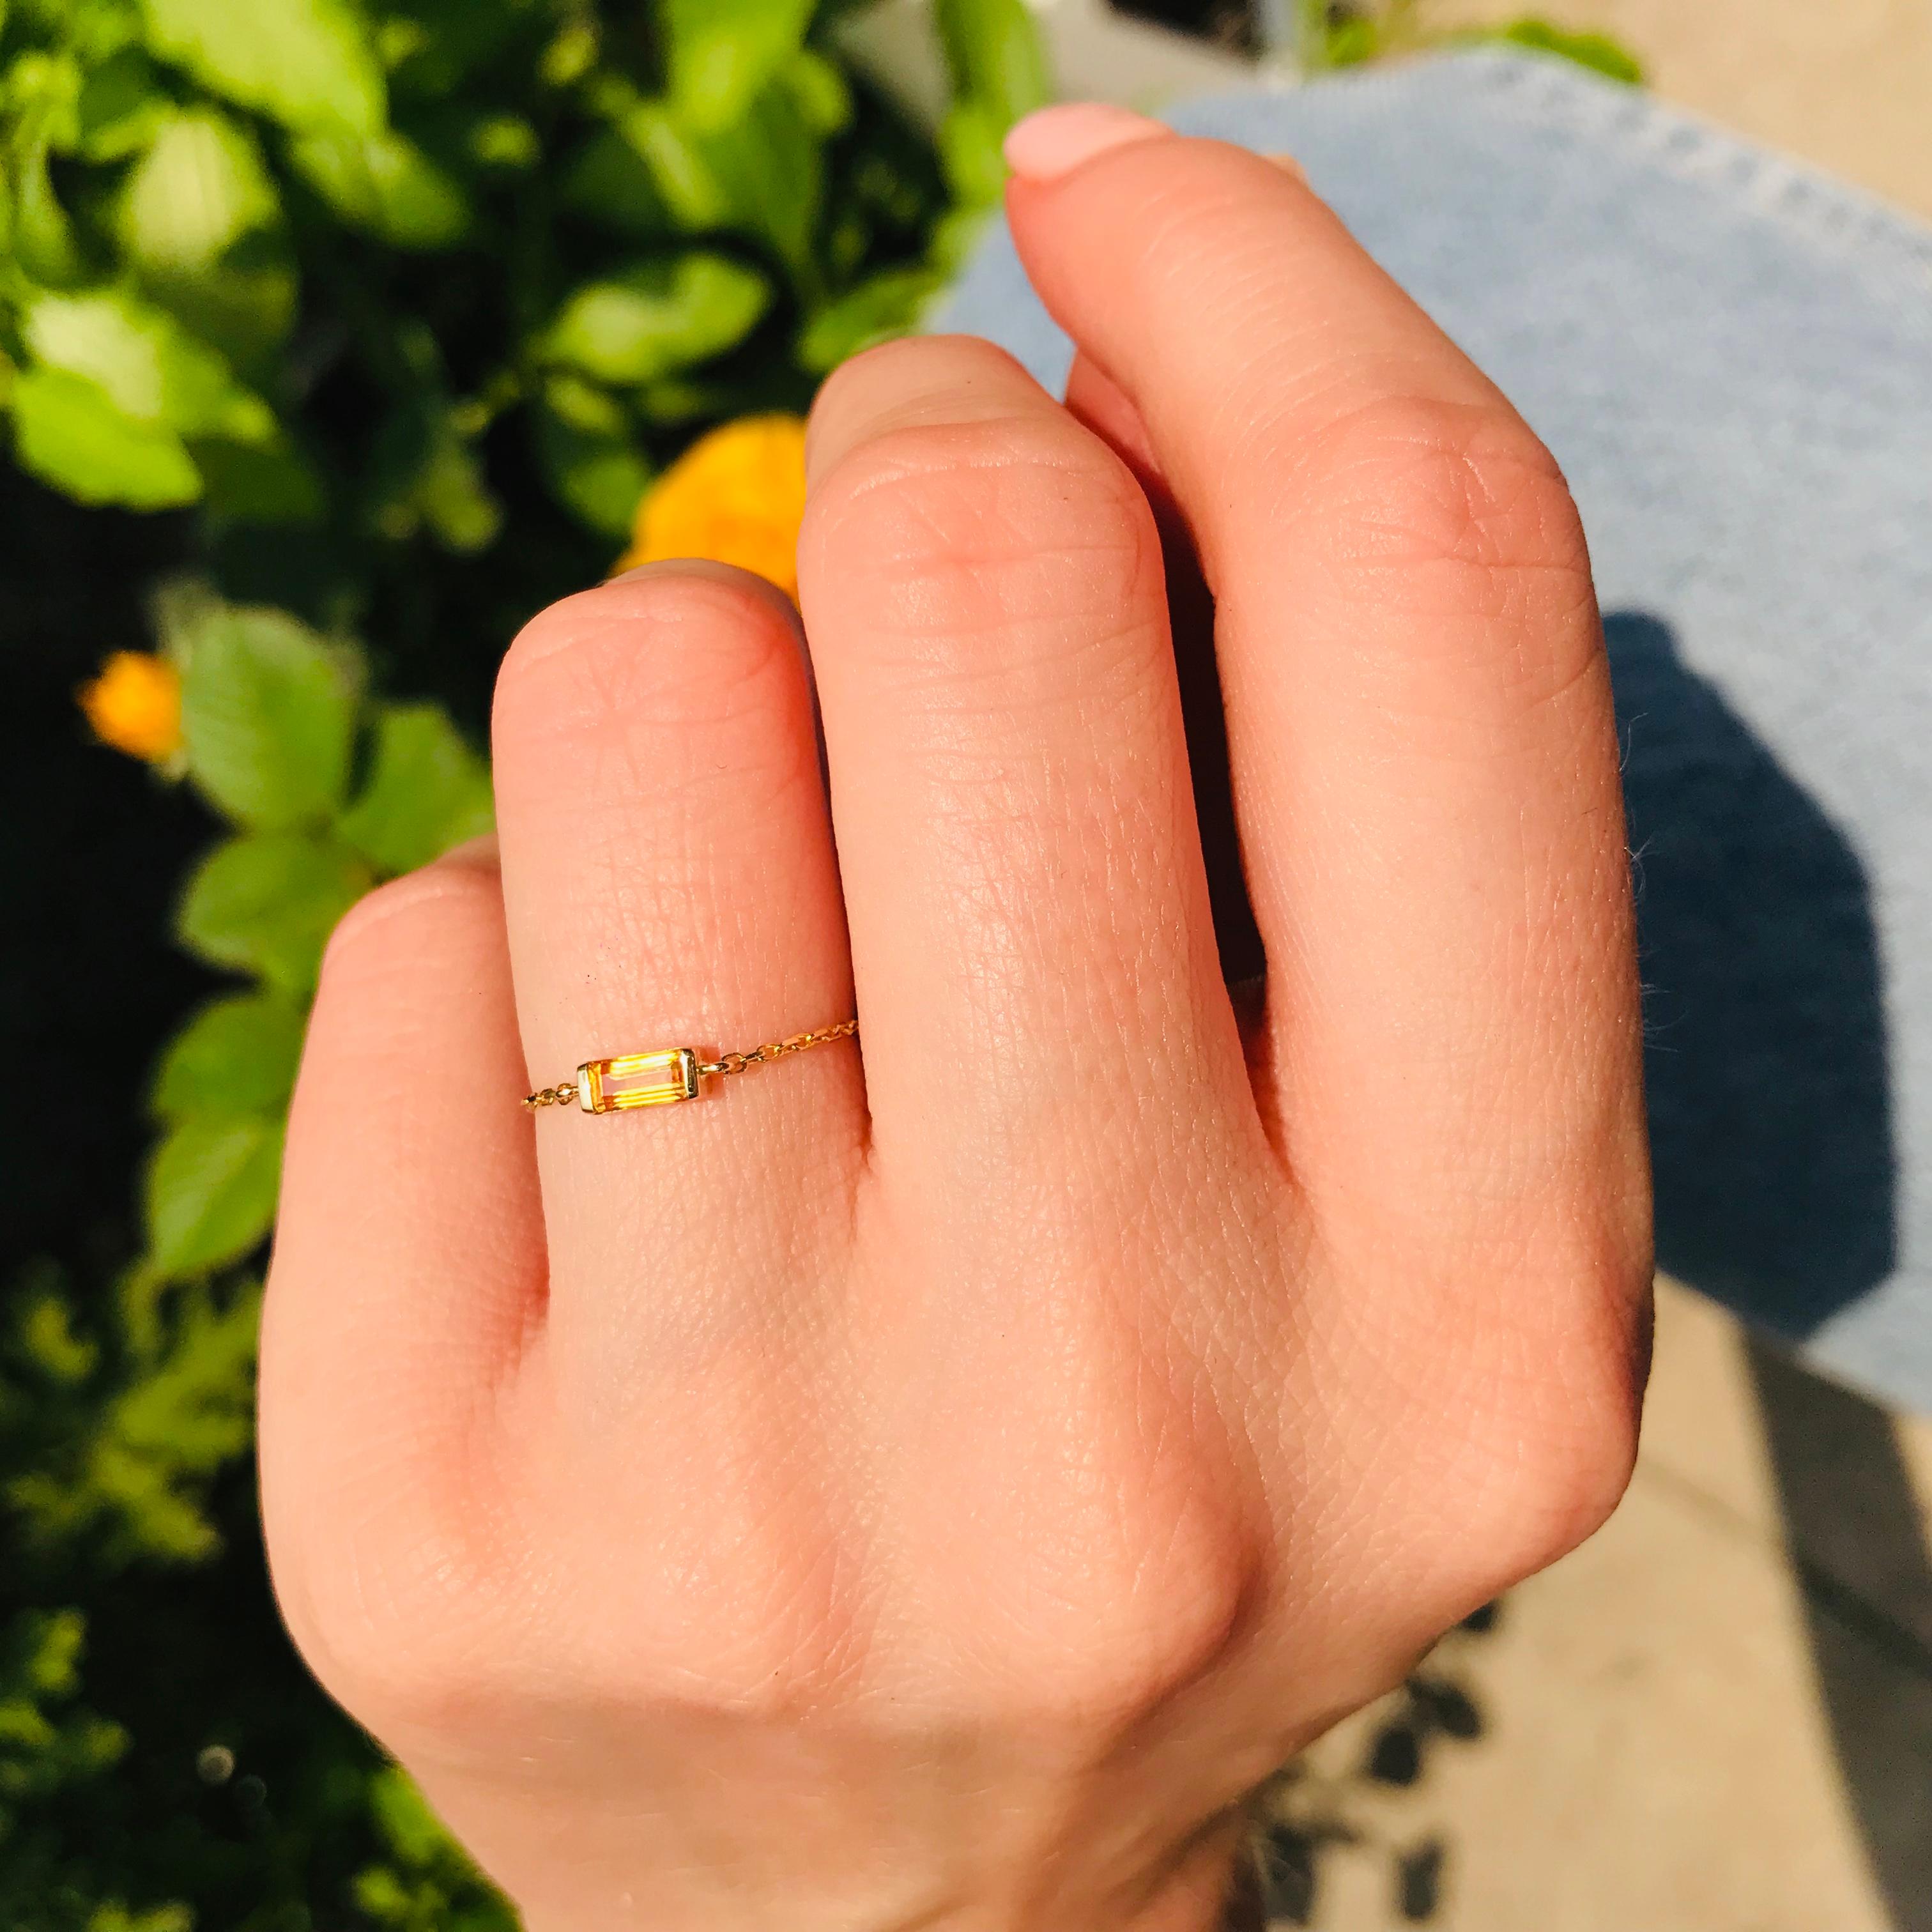 Yellow is on trend this season! This yellow Sapphire chain ring is cheerful as a sunny summer morning. Beautifully wear it by itself or stack with other your favorite rings, this glistening baguette-cut ring will enliven your summer look! 

We are